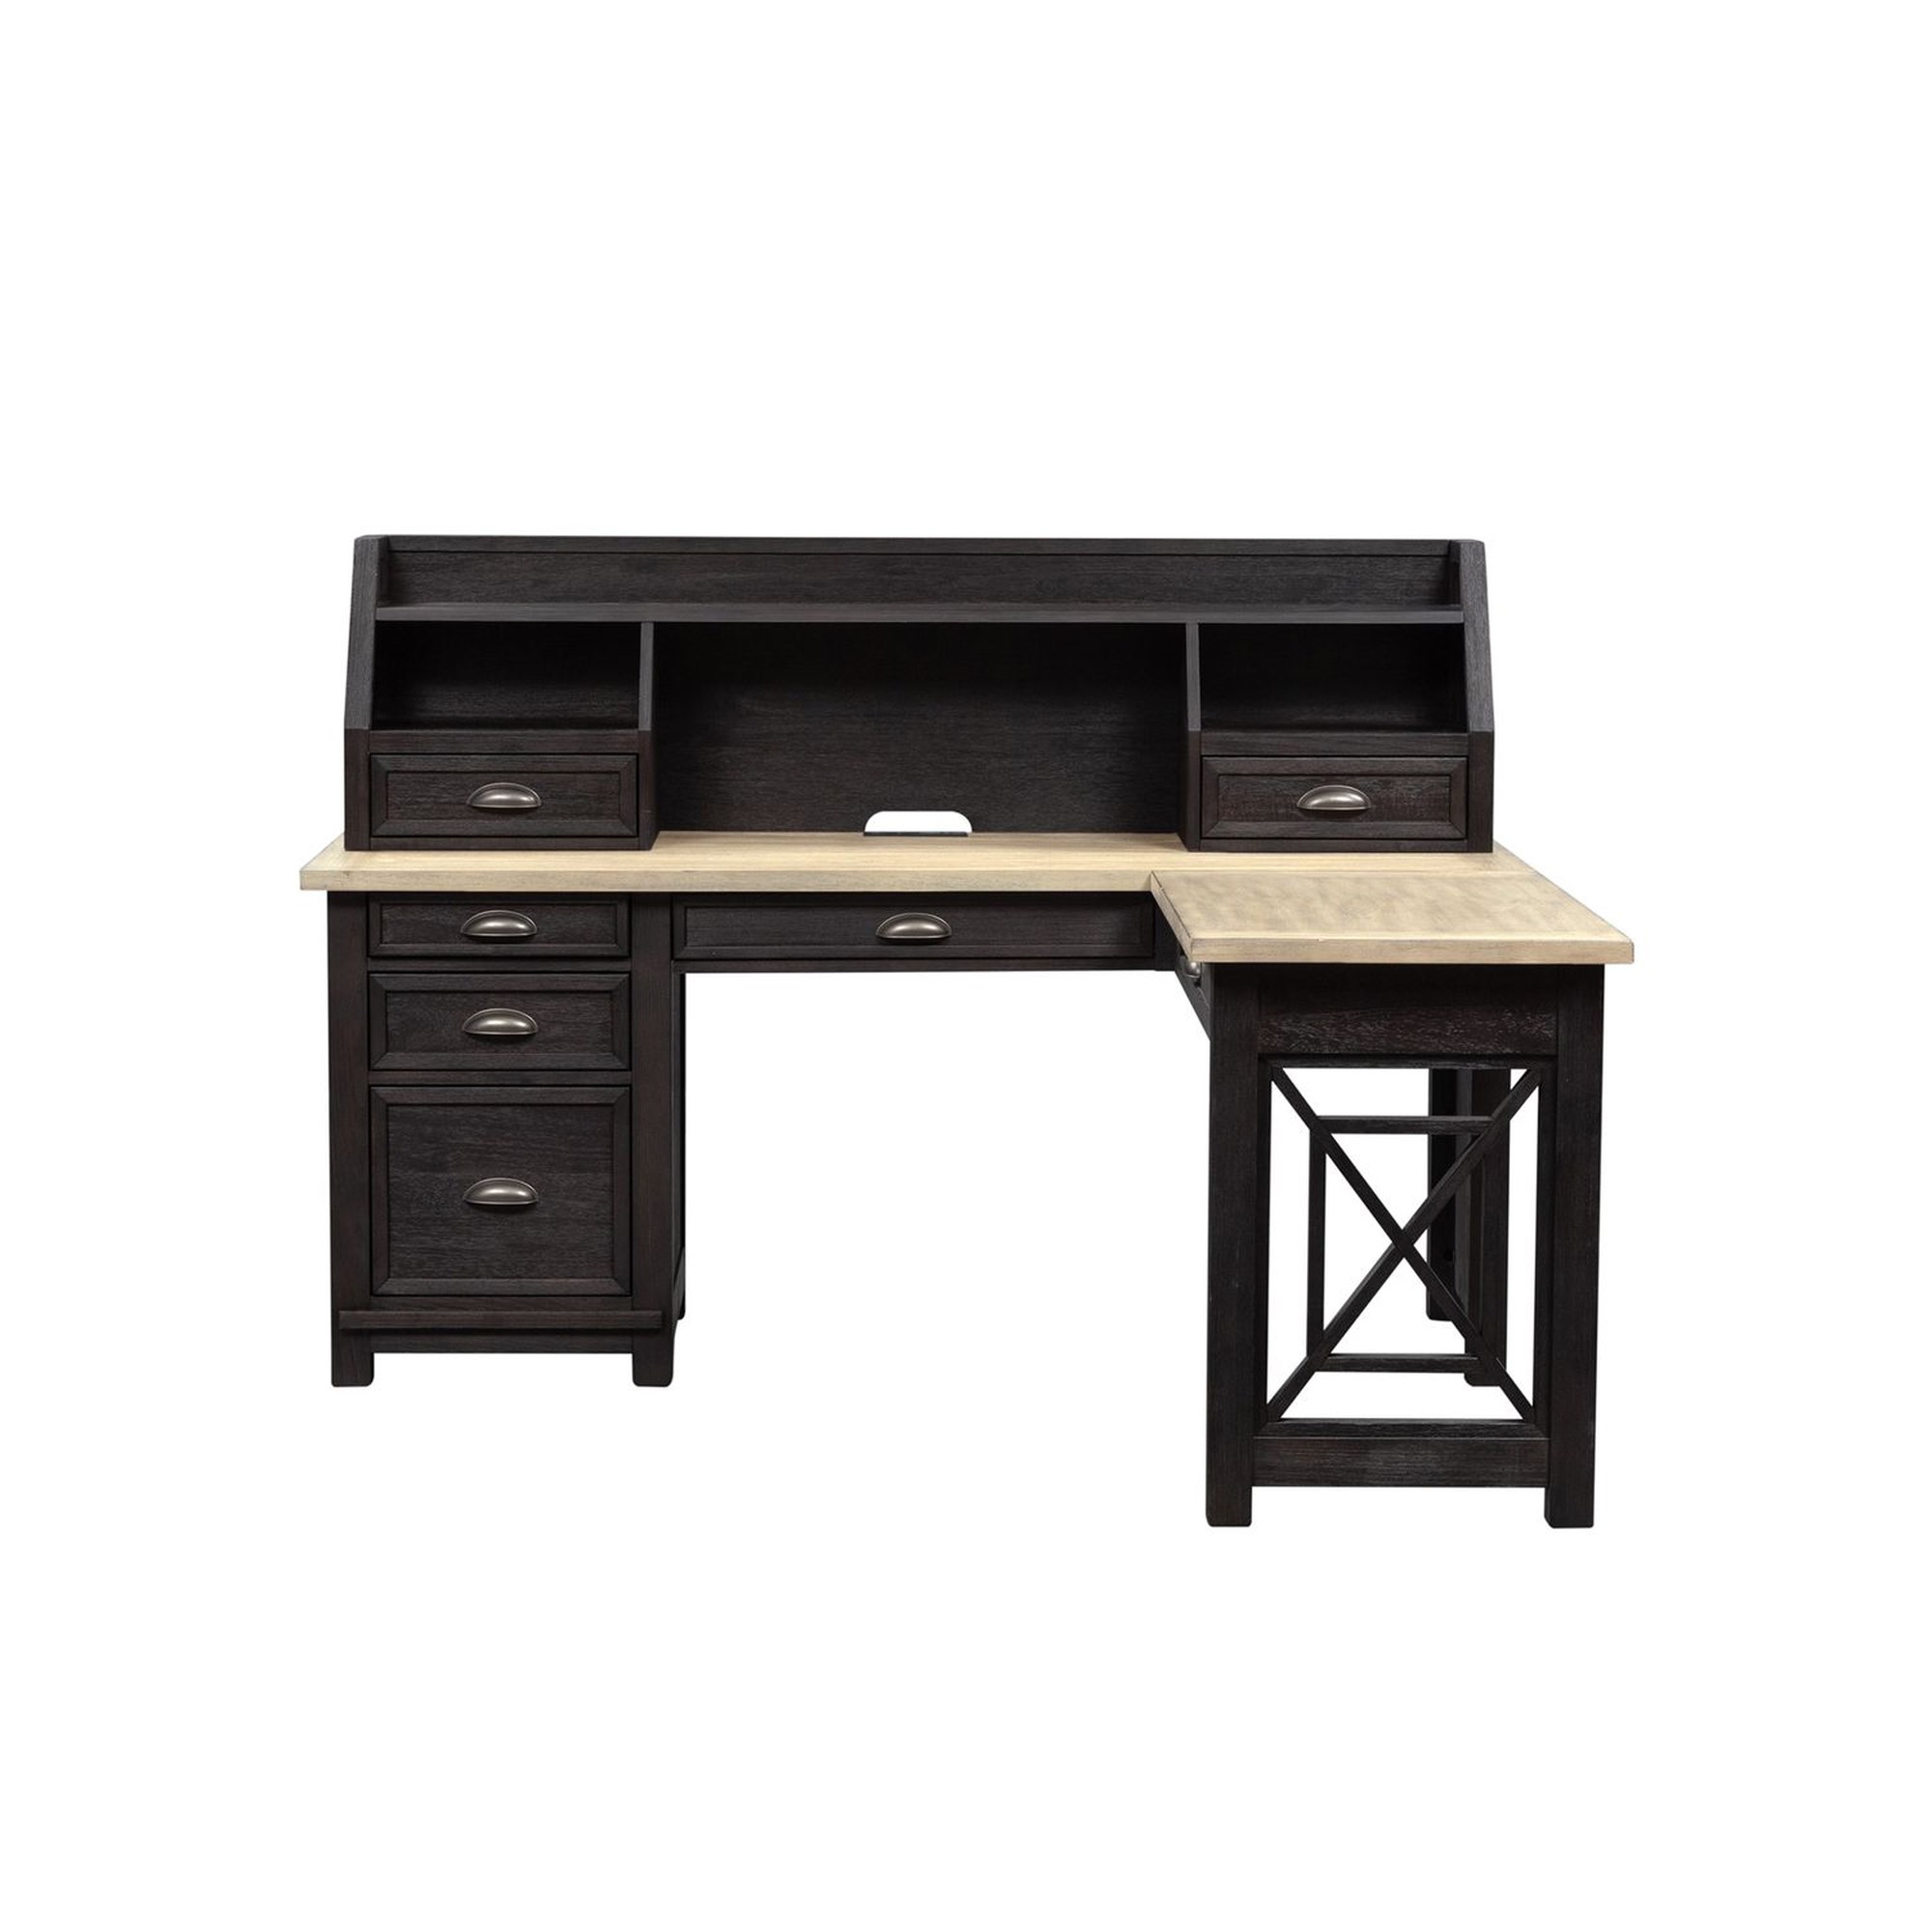 Home Office Furniture - VanDrie Home Furnishings - Cadillac, Traverse City,  Big Rapids, Houghton Lake and Northern Michigan Home Office Furniture Store